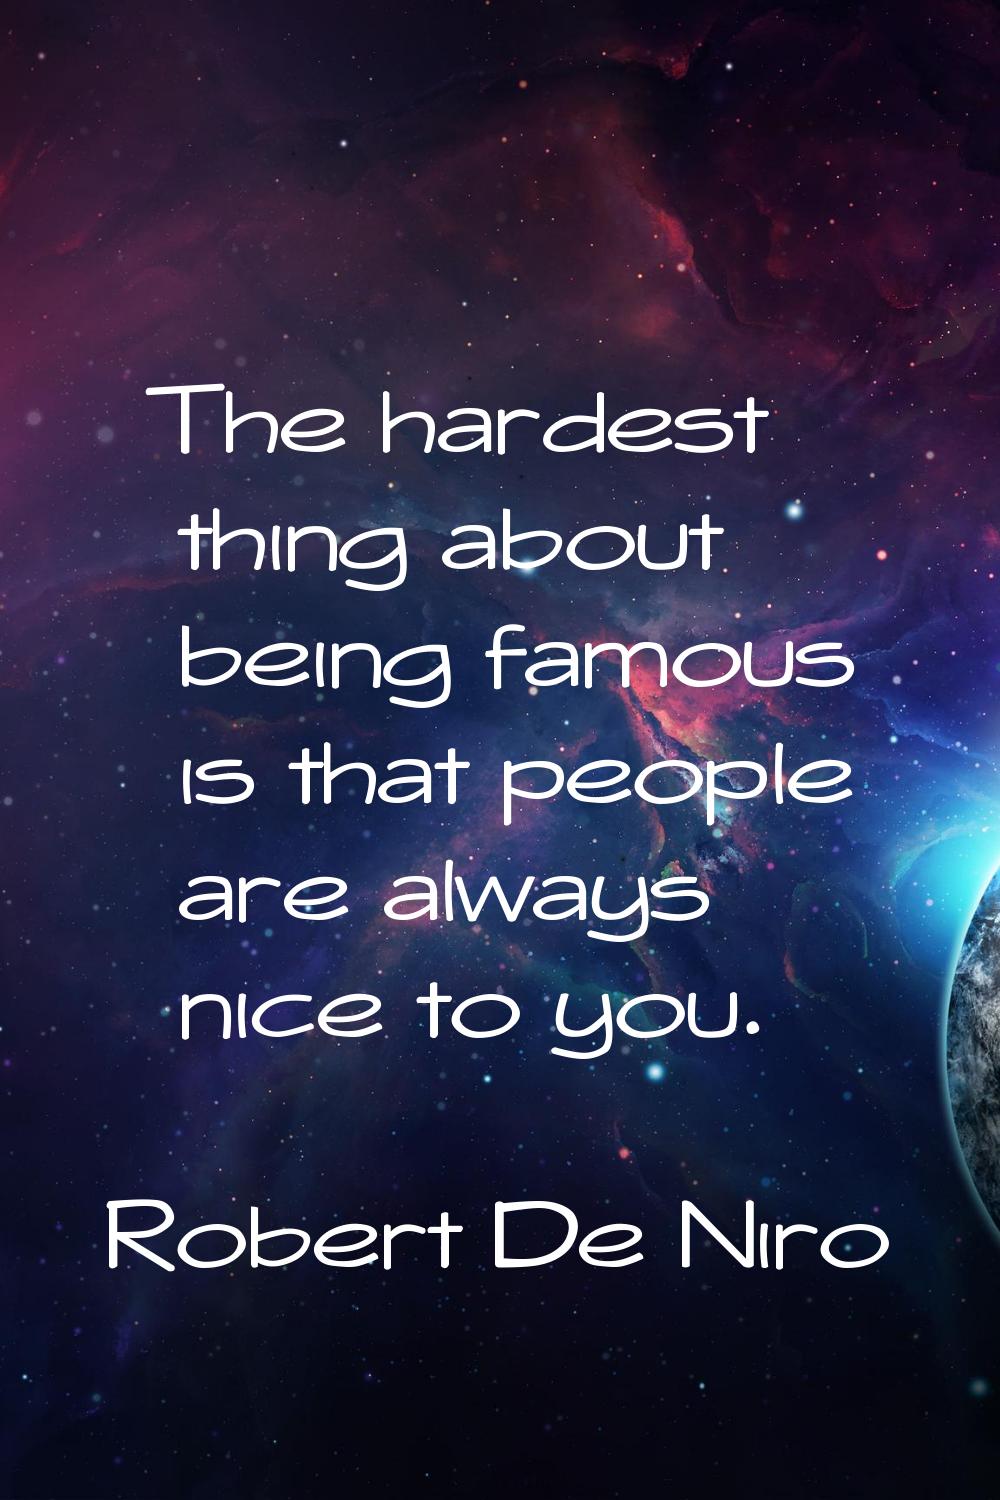 The hardest thing about being famous is that people are always nice to you.